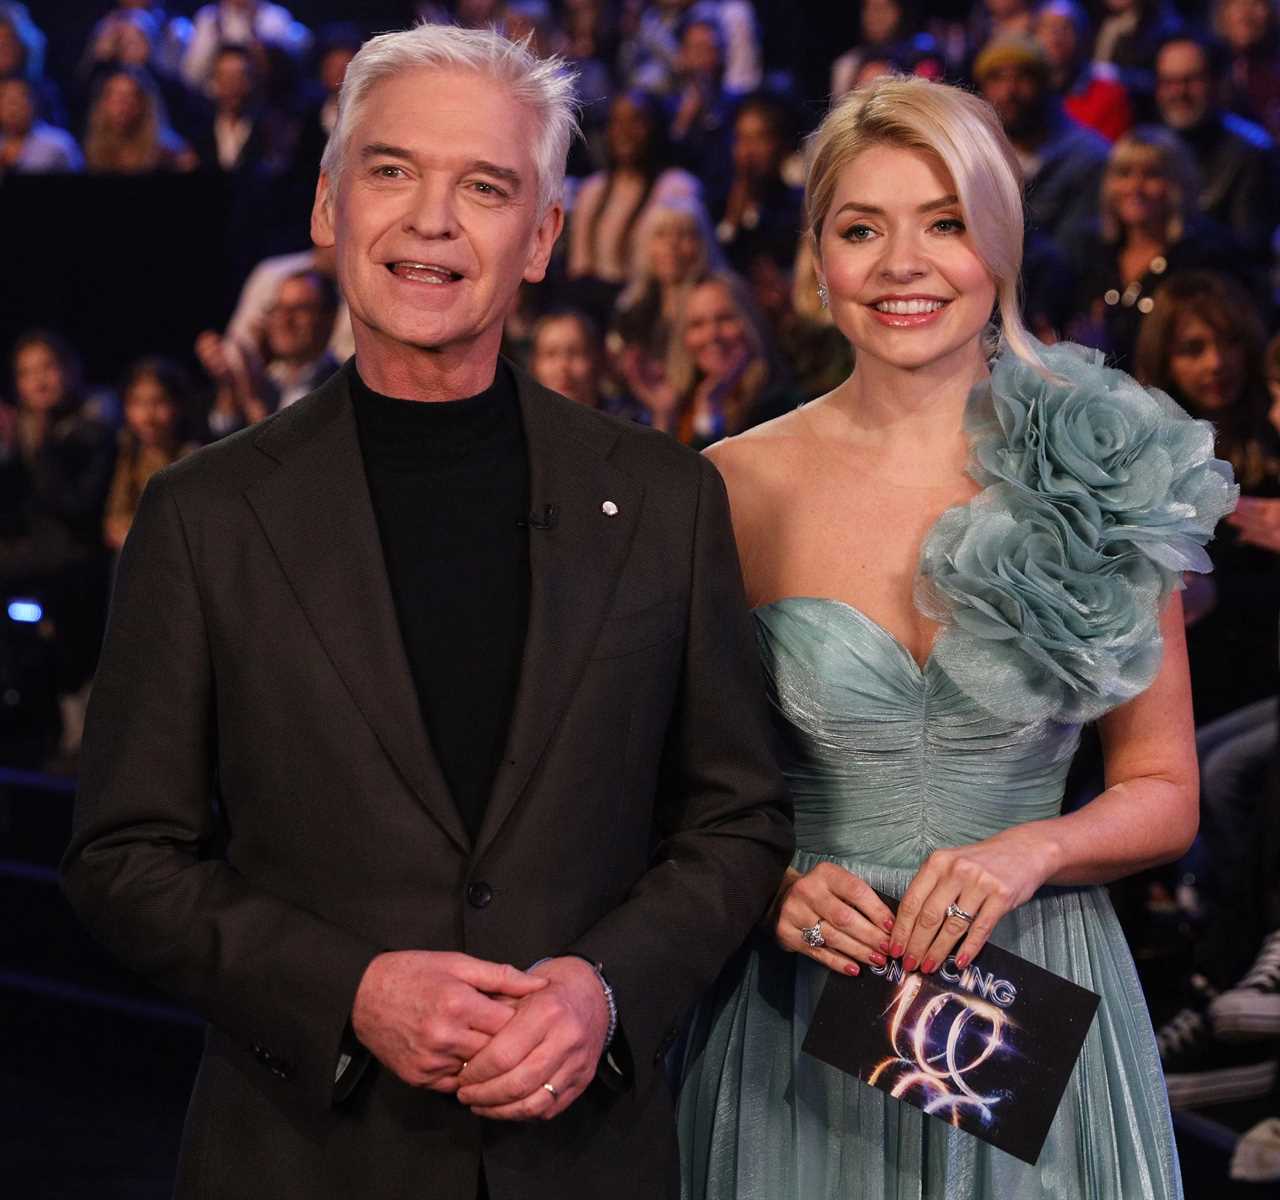 Dancing On Ice future at risk after Phillip Schofield dramatically quits This Morning